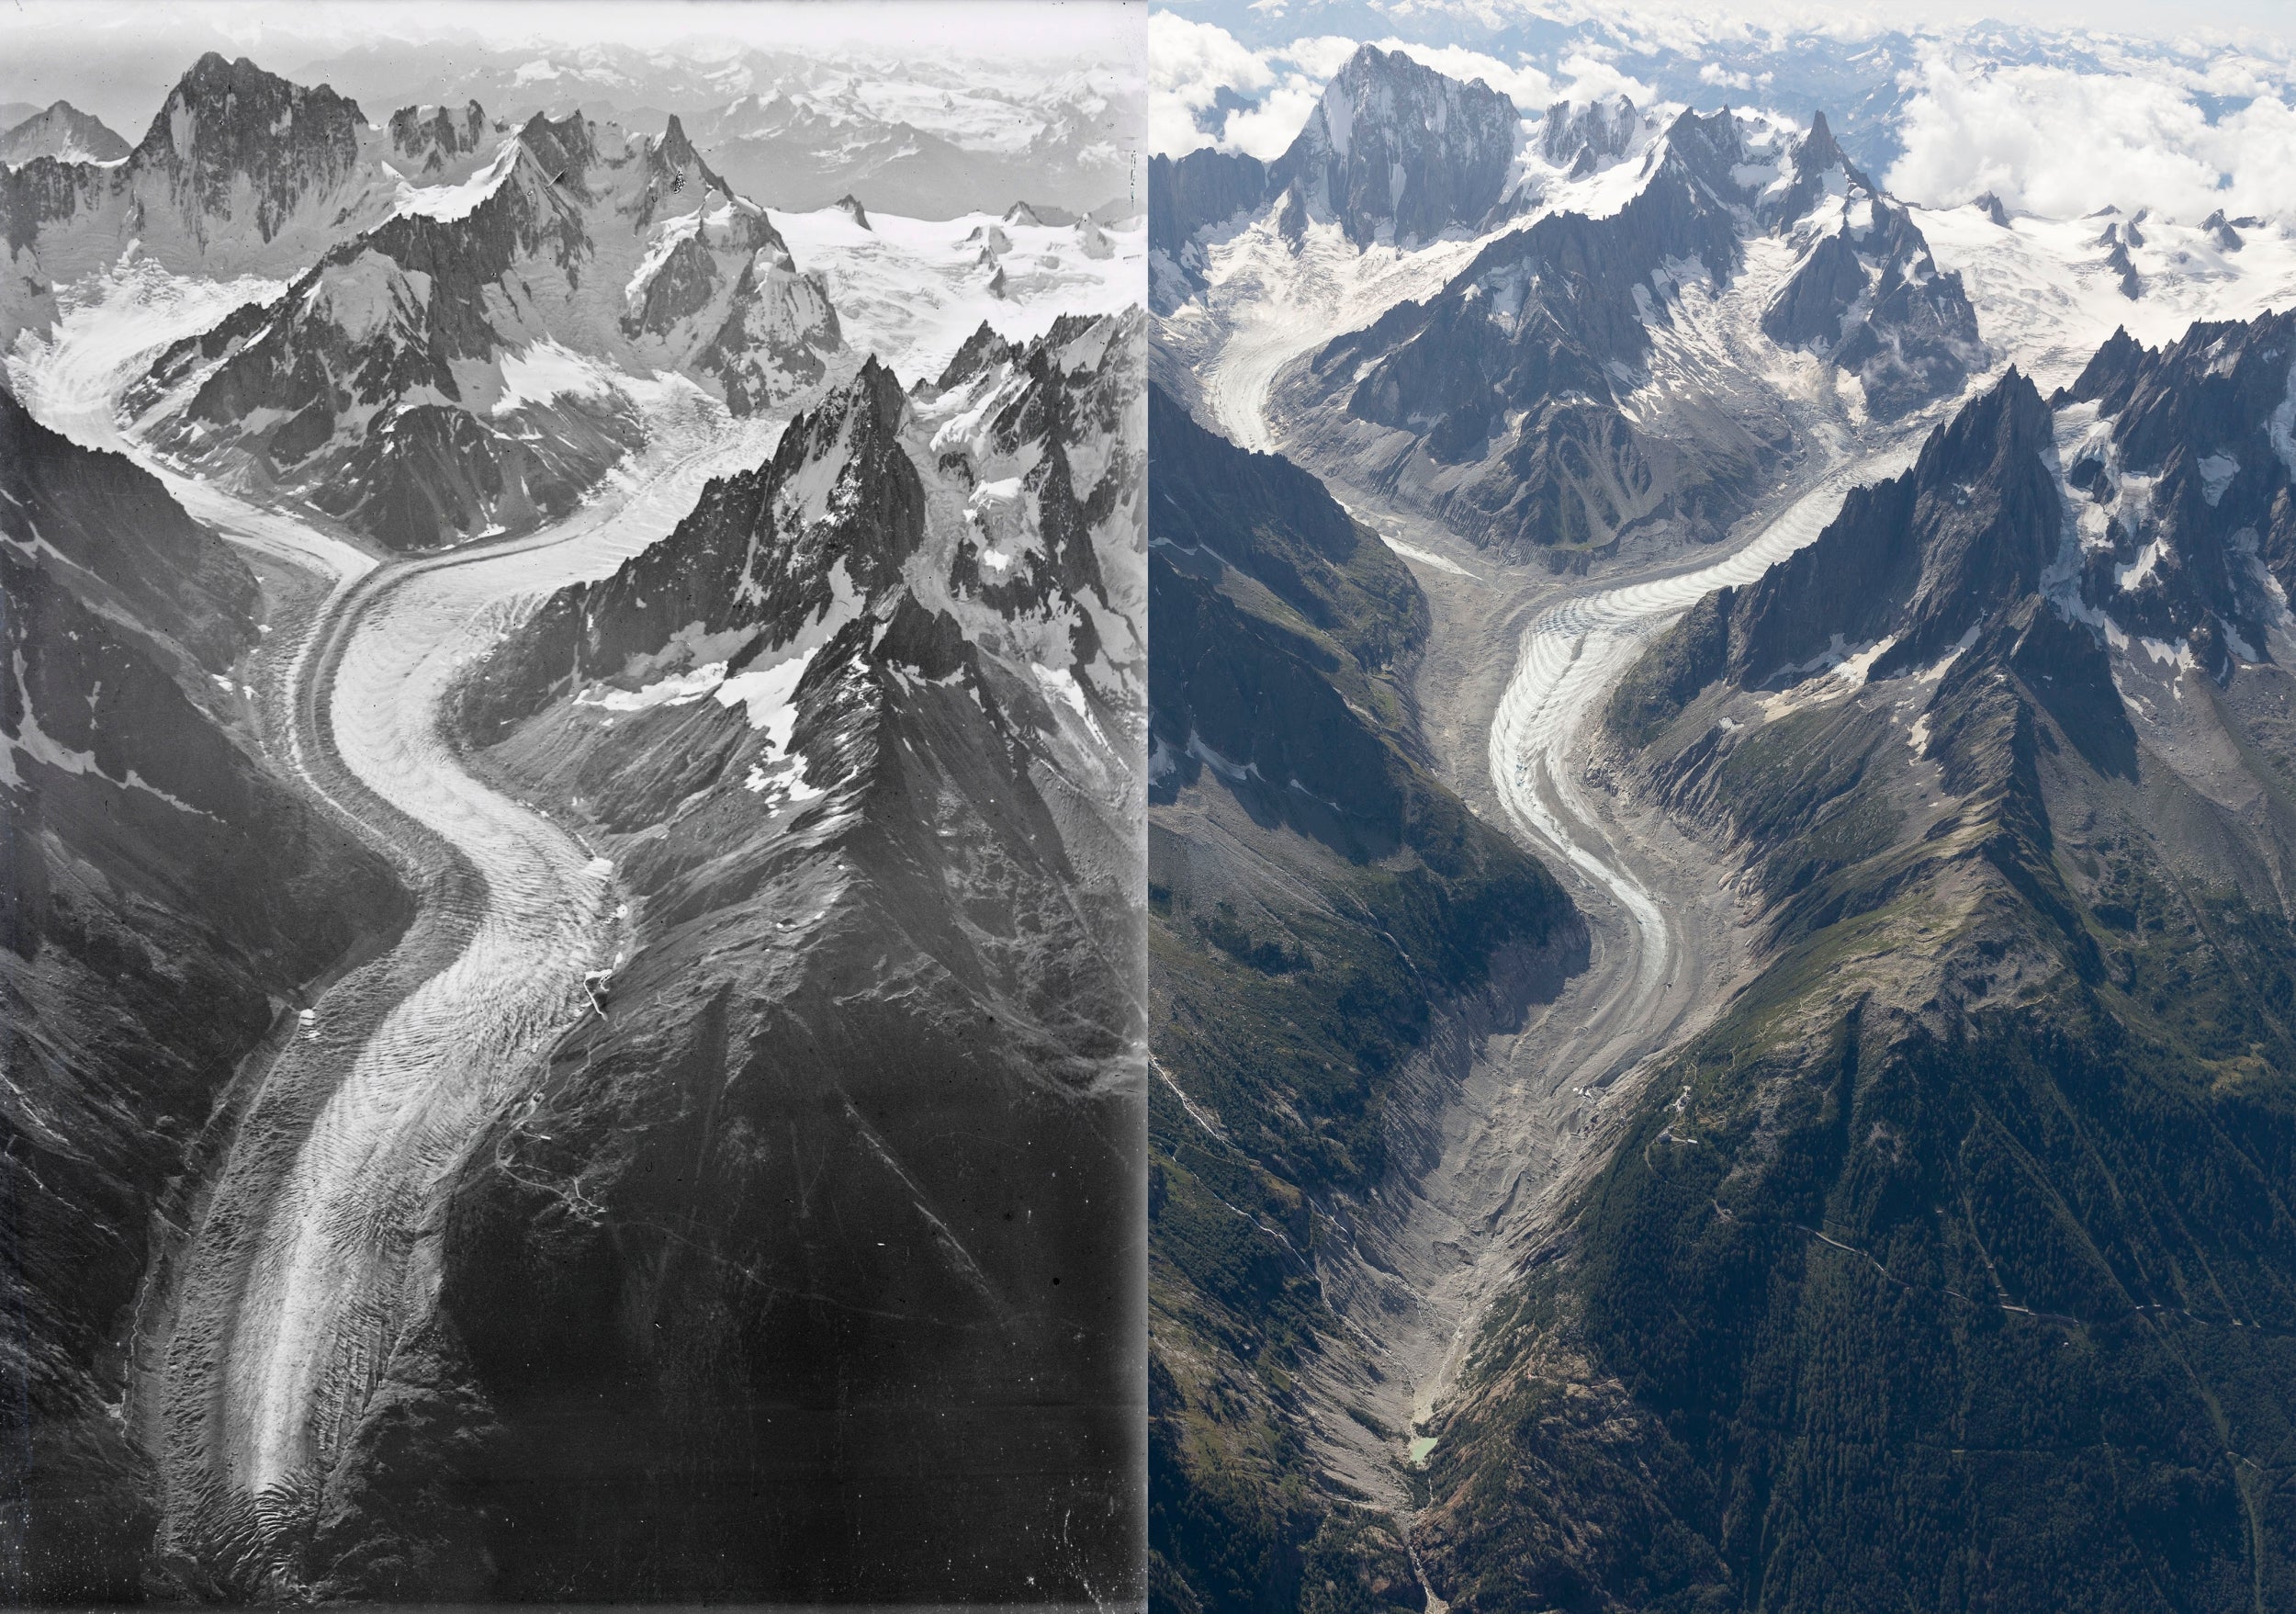 Mont Blanc climate change impact revealed in photos 100 years apart - The Independent